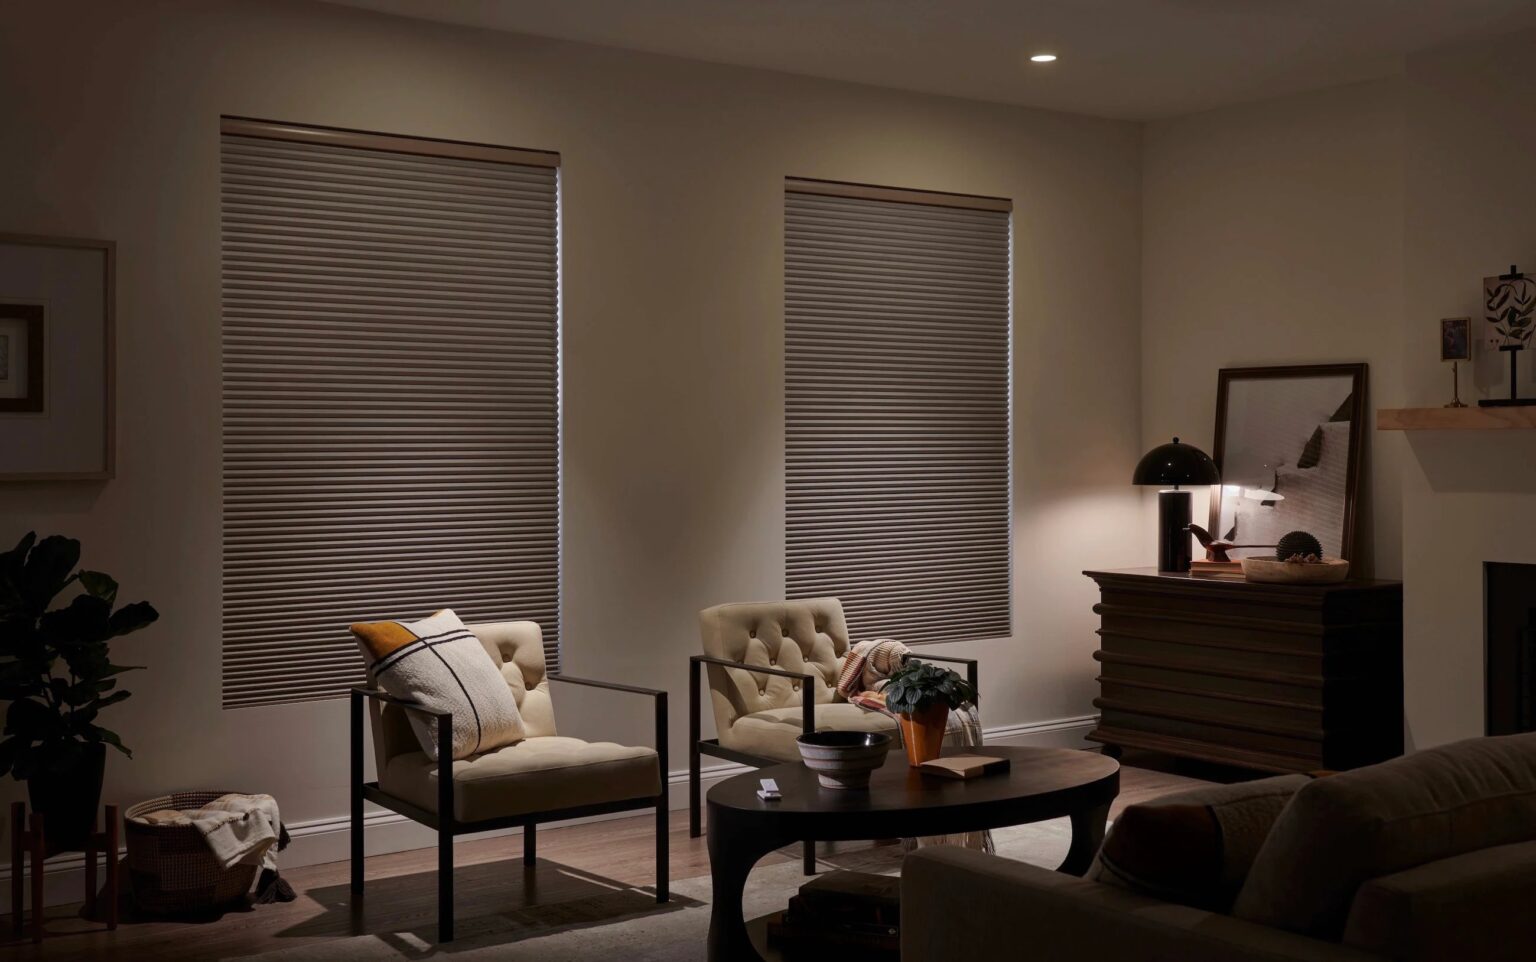 Some of Lutron's HomeKit-enabled Serena shades can really block a lot of light.